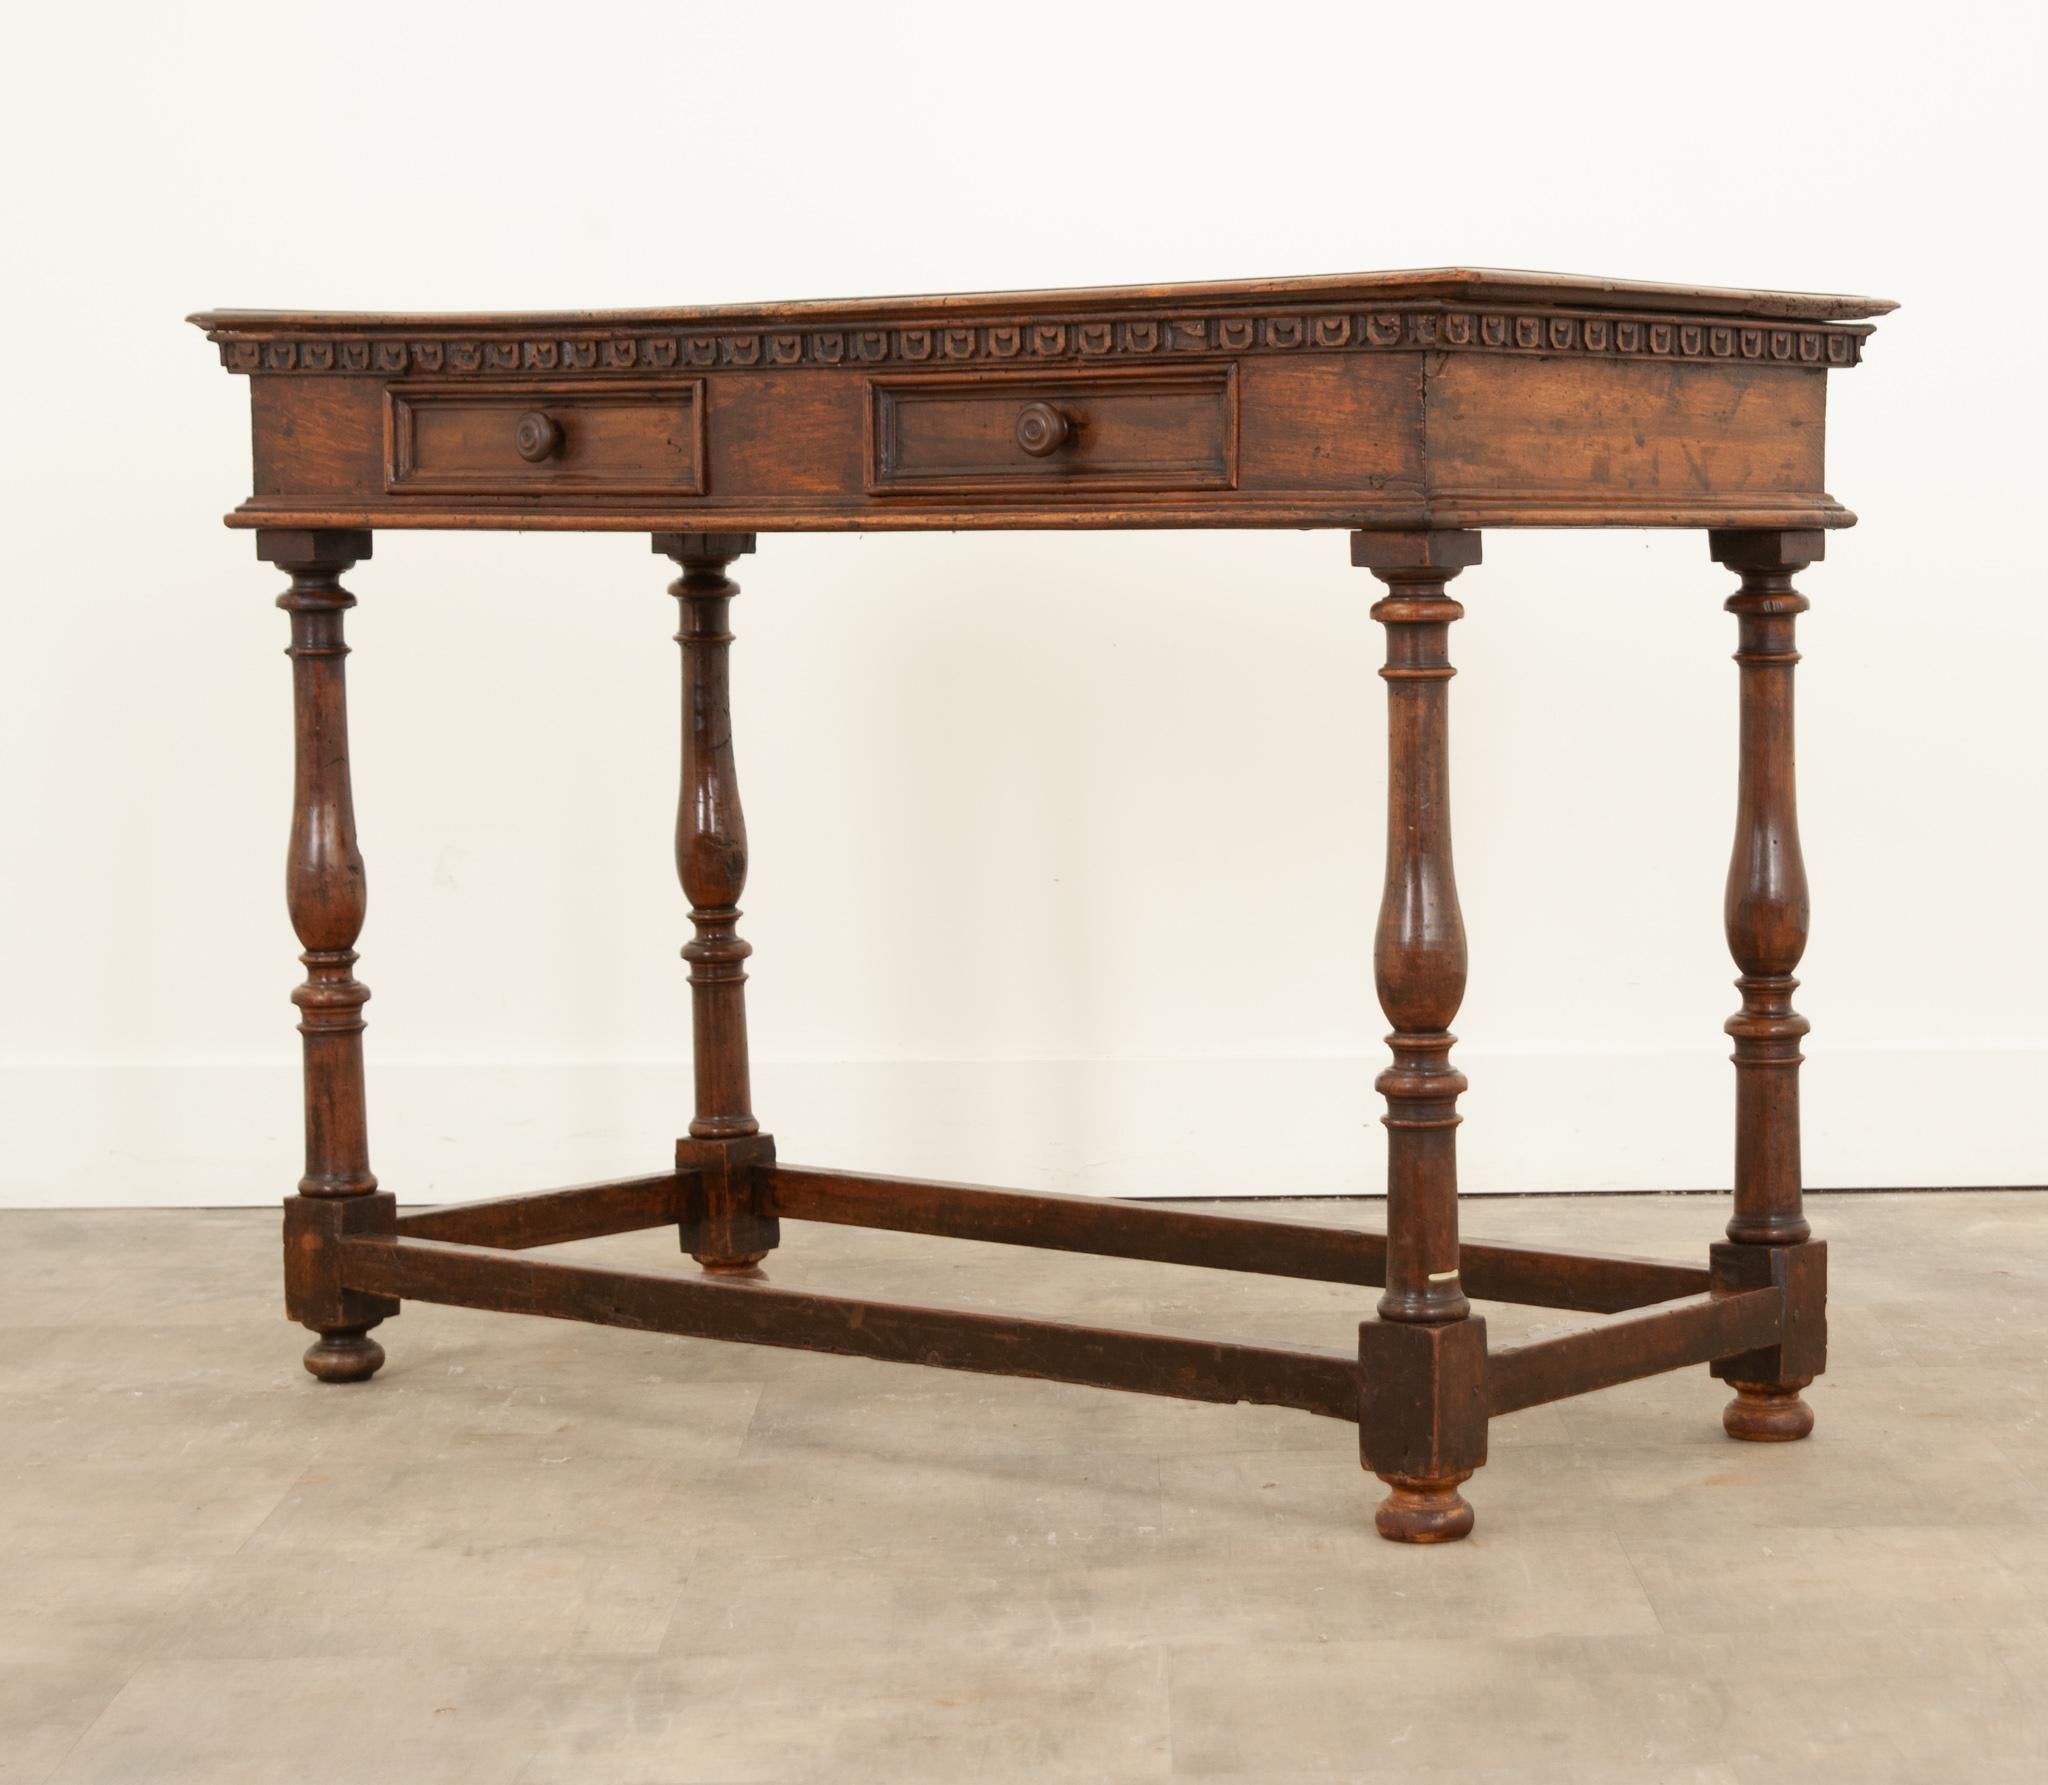 A handsome Italian walnut console table from the early 19th century with decoratively carved molding, turned baluster legs, plain side stretchers and bun feet. Created in Italy circa 1820, this walnut console table features a rectangular top with